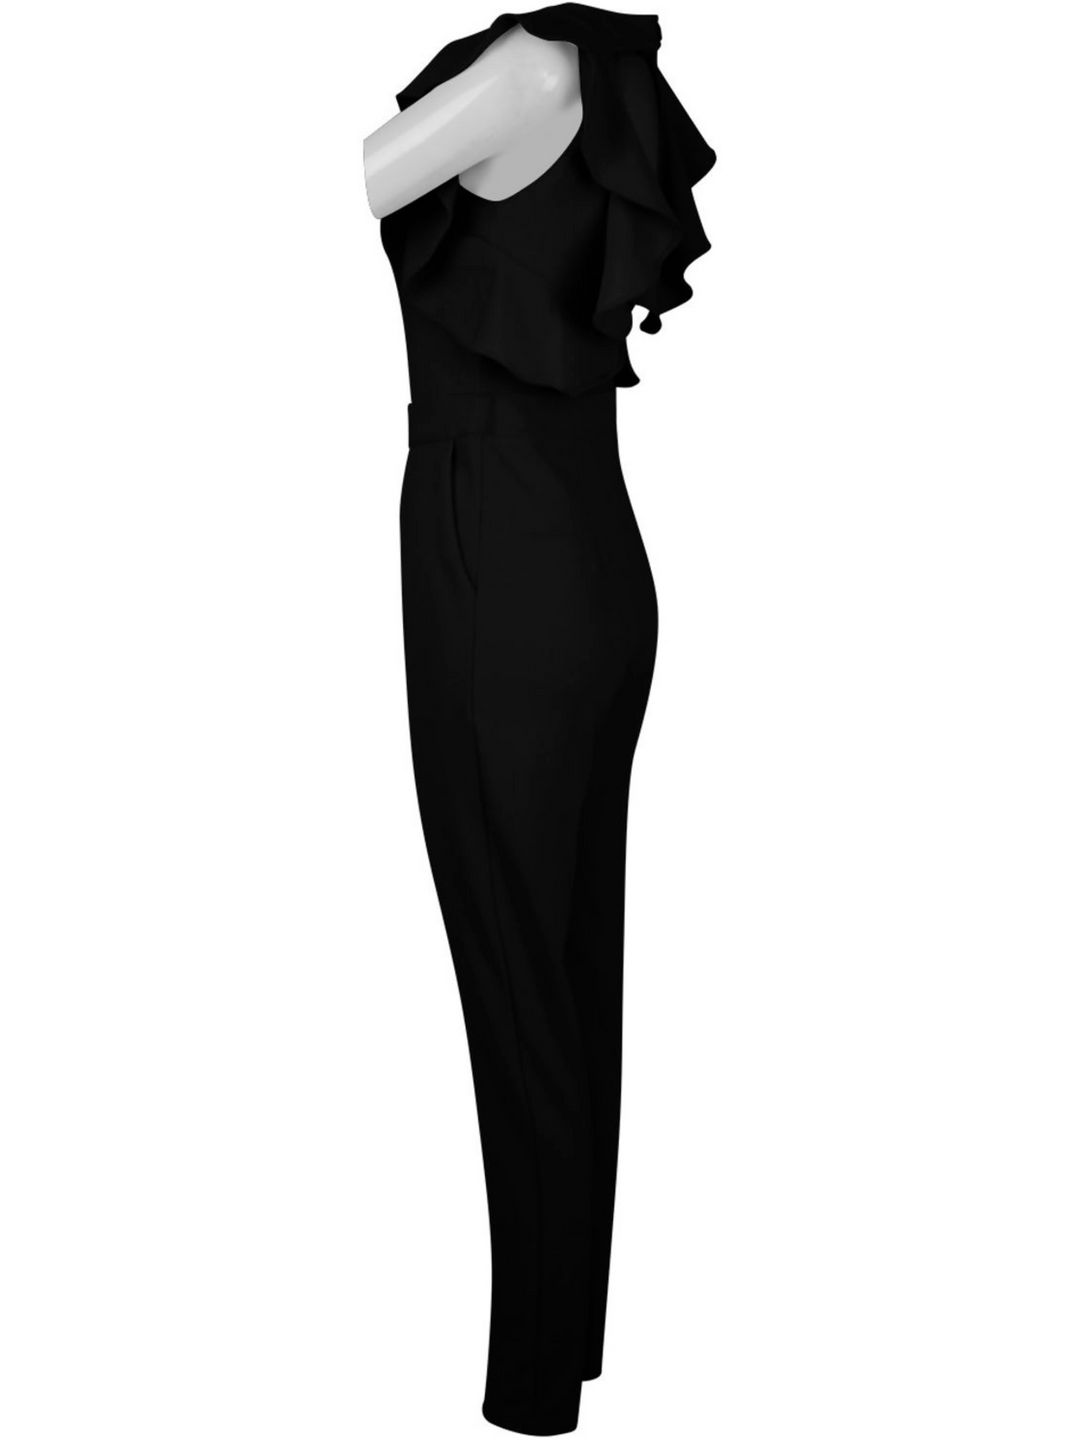 Ghost manequin wears sleeveless black jumpsuit with pleated frill sides and  open back. The jumpsuit has a concealed zip back fastening. The ghost  manequin stands to the sides. The frilled sides can be seen, as well as the tailored cut. 